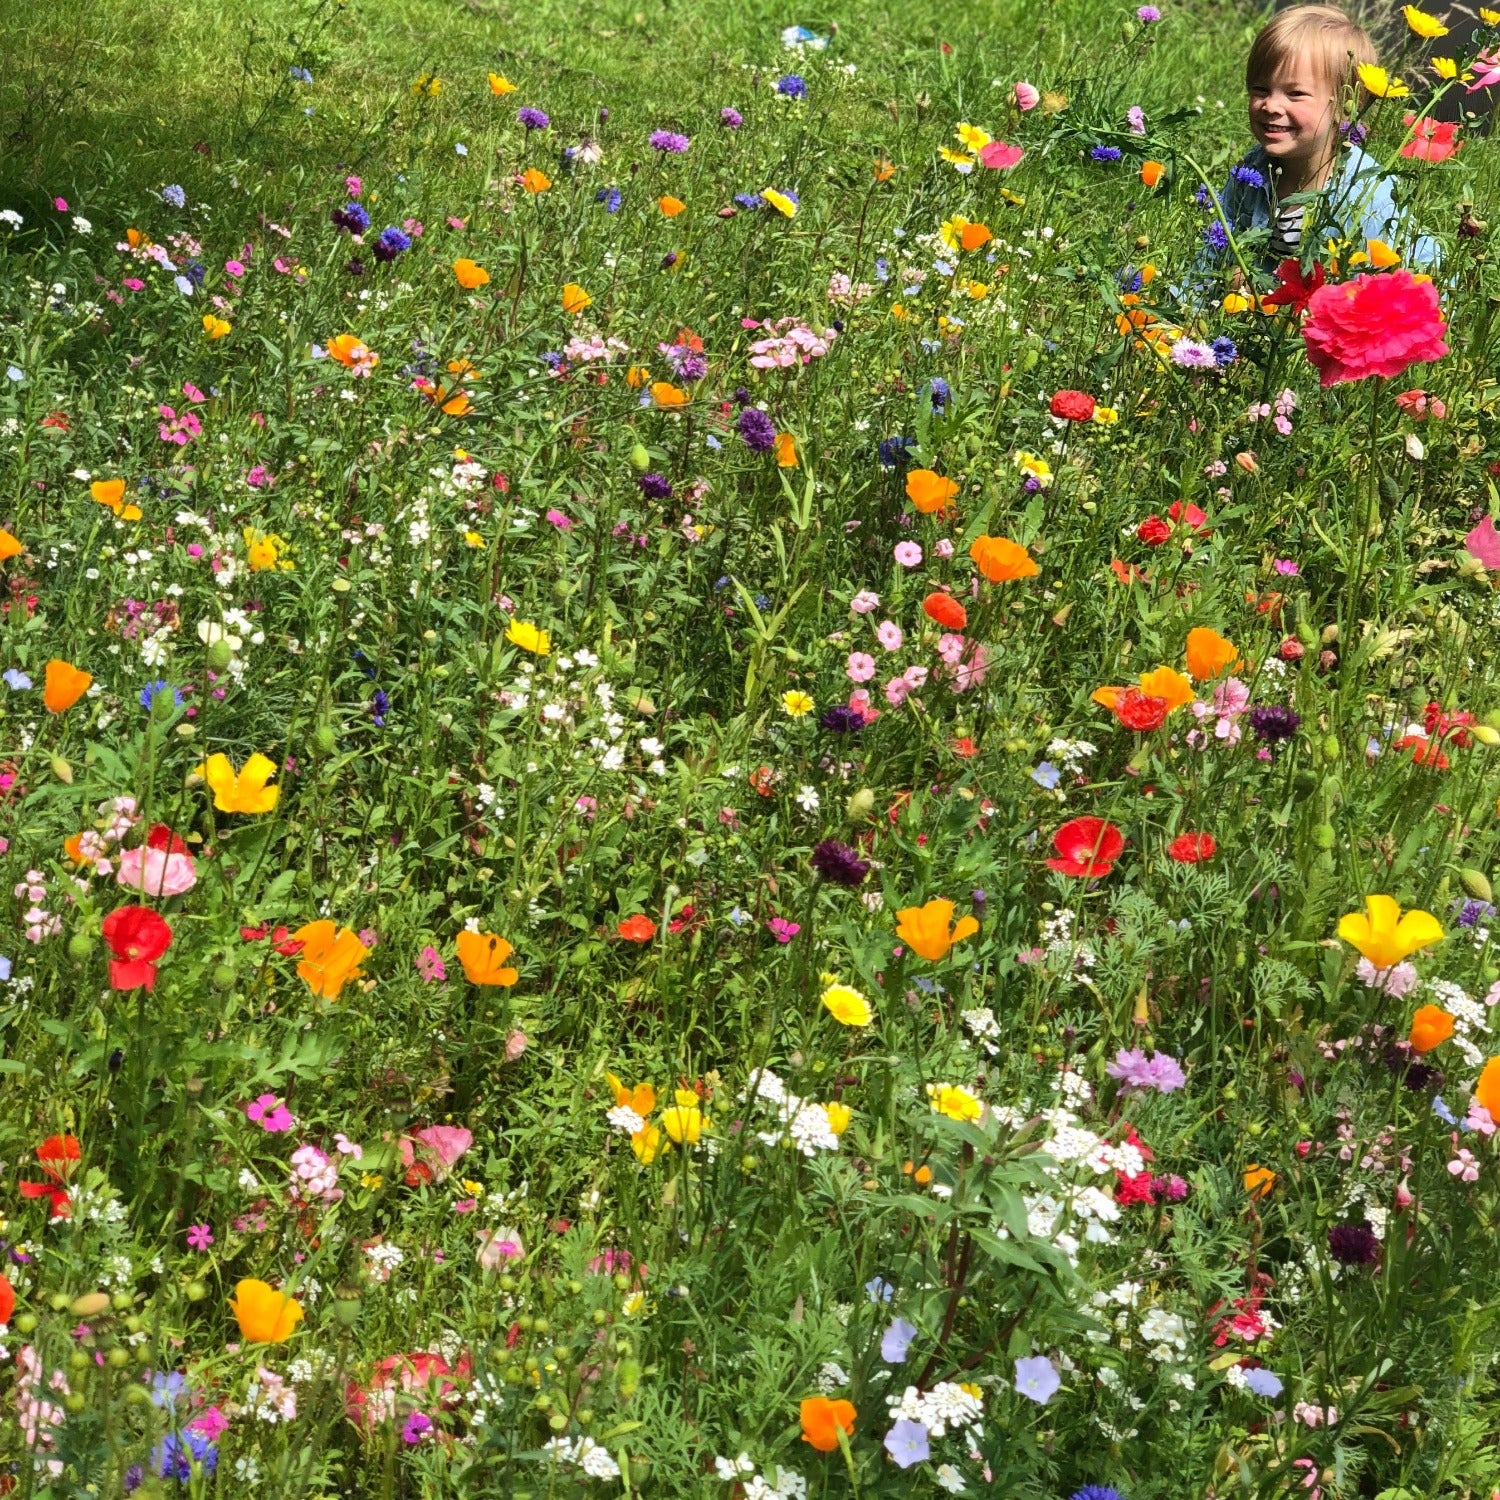 Plant wildflowers everywhere. Bees love them. We love bees. Happy bees make honey.